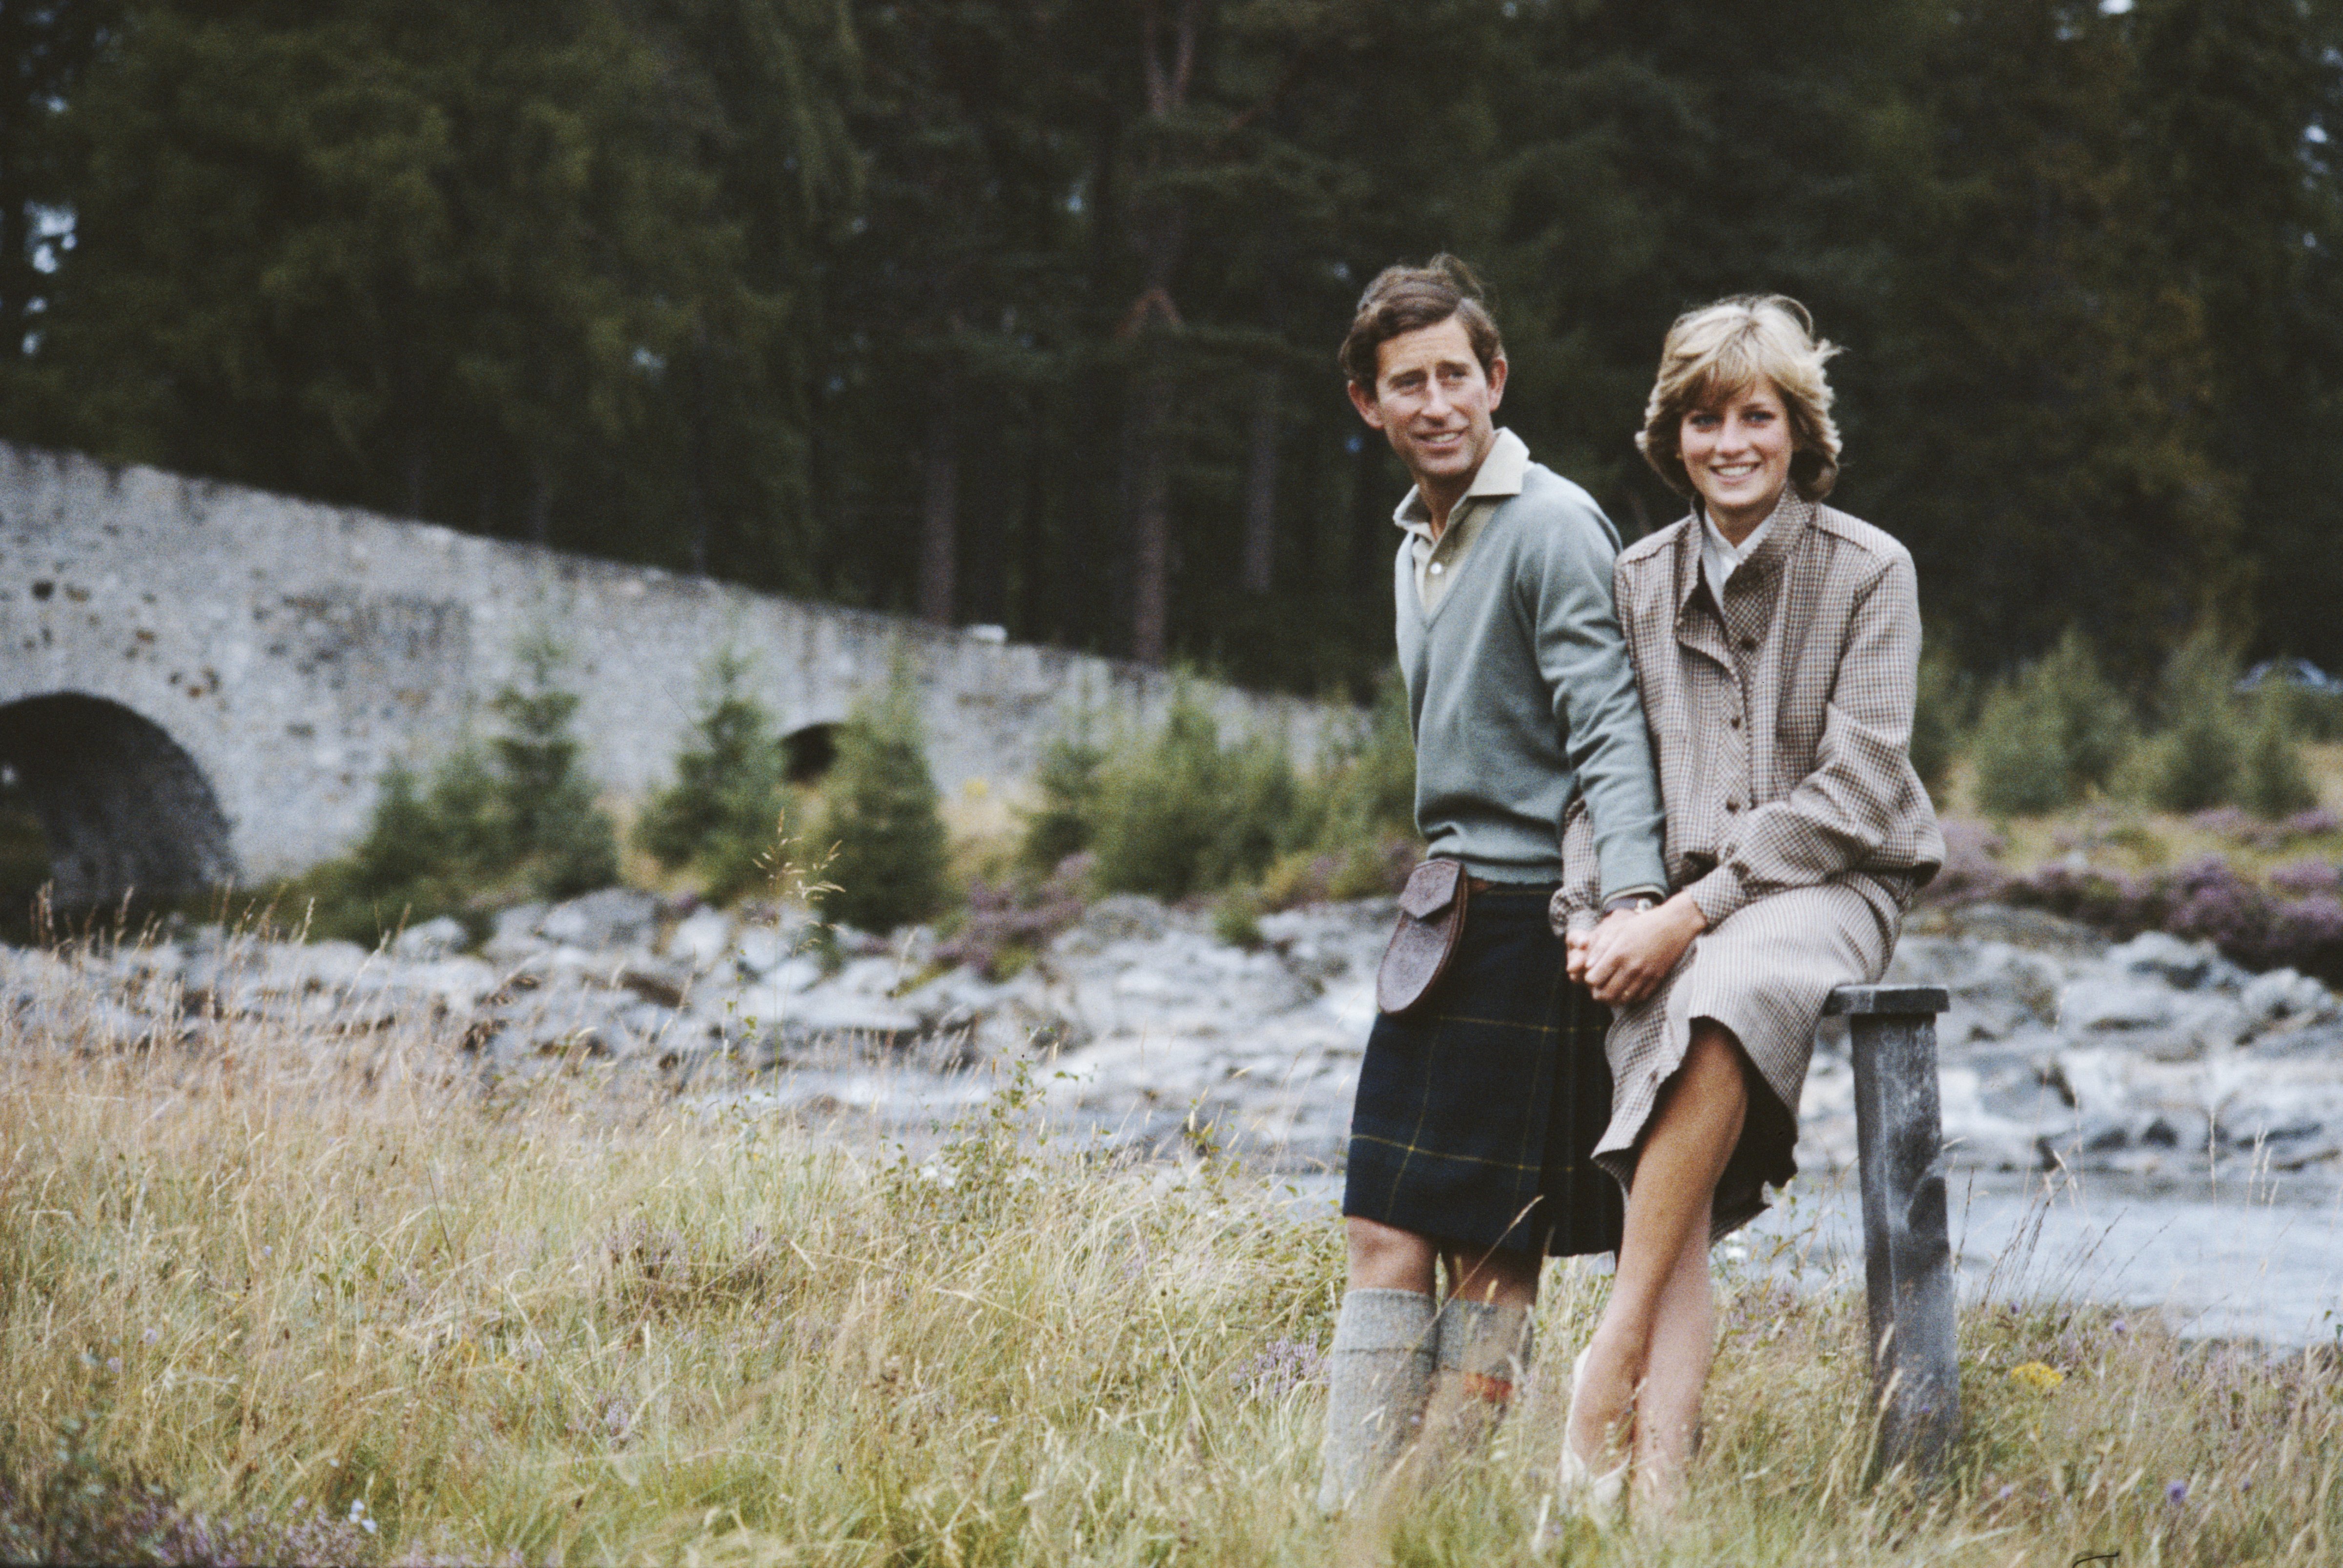 Prince Charles and Diana, Princess of Wales pose together during their honeymoon in Balmoral, Scotland, 19th August 1981 (Serge Lemoine—Getty Images)